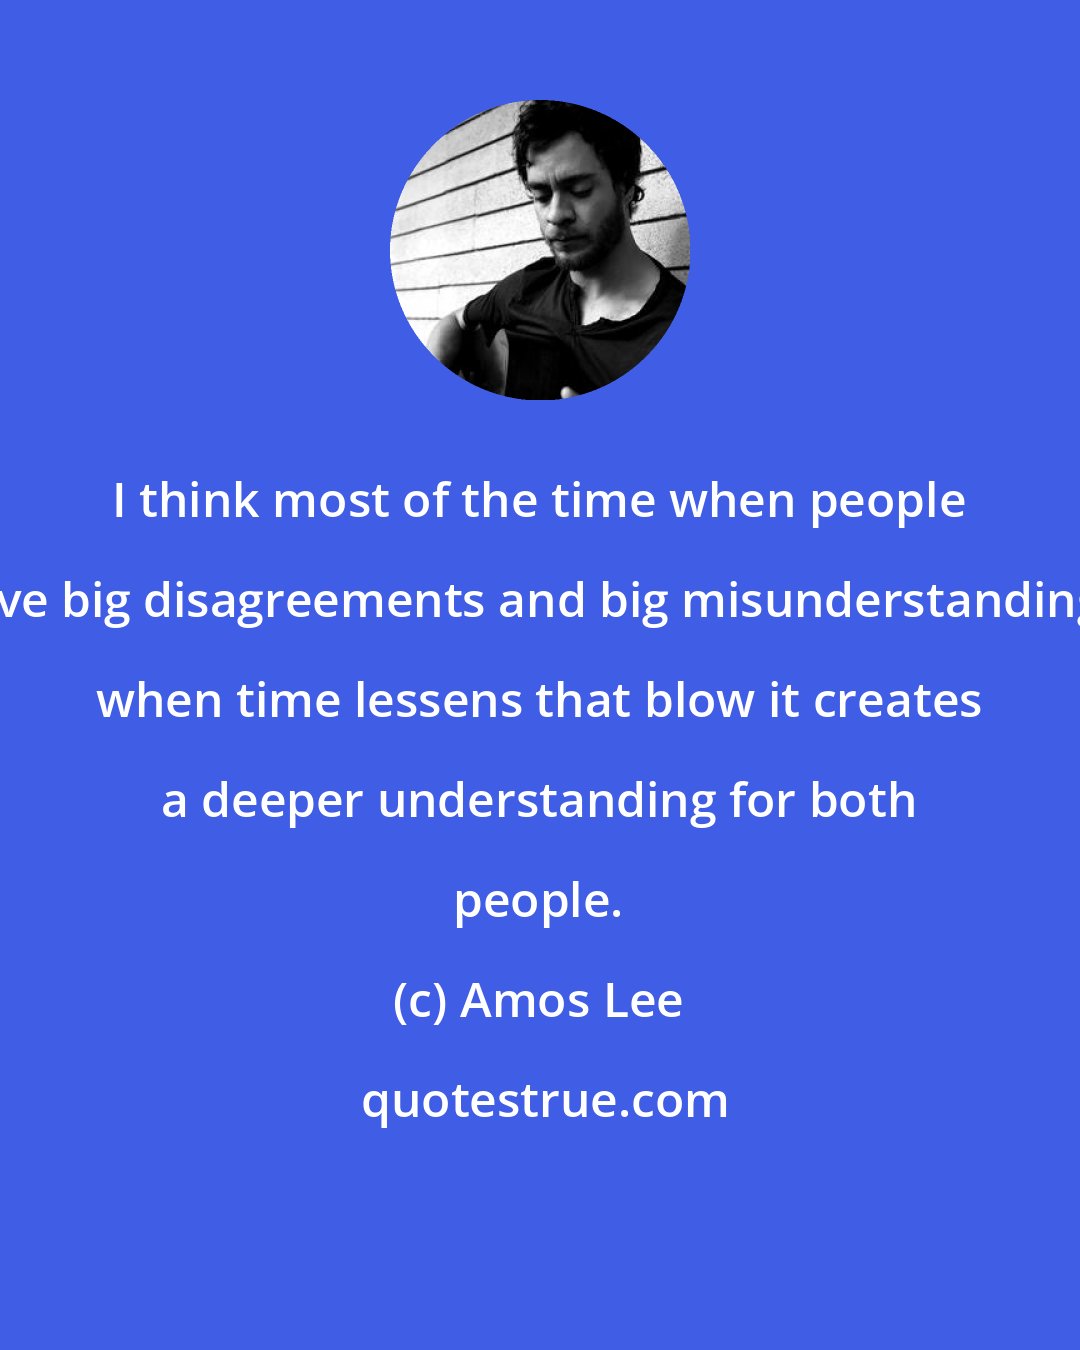 Amos Lee: I think most of the time when people have big disagreements and big misunderstandings, when time lessens that blow it creates a deeper understanding for both people.